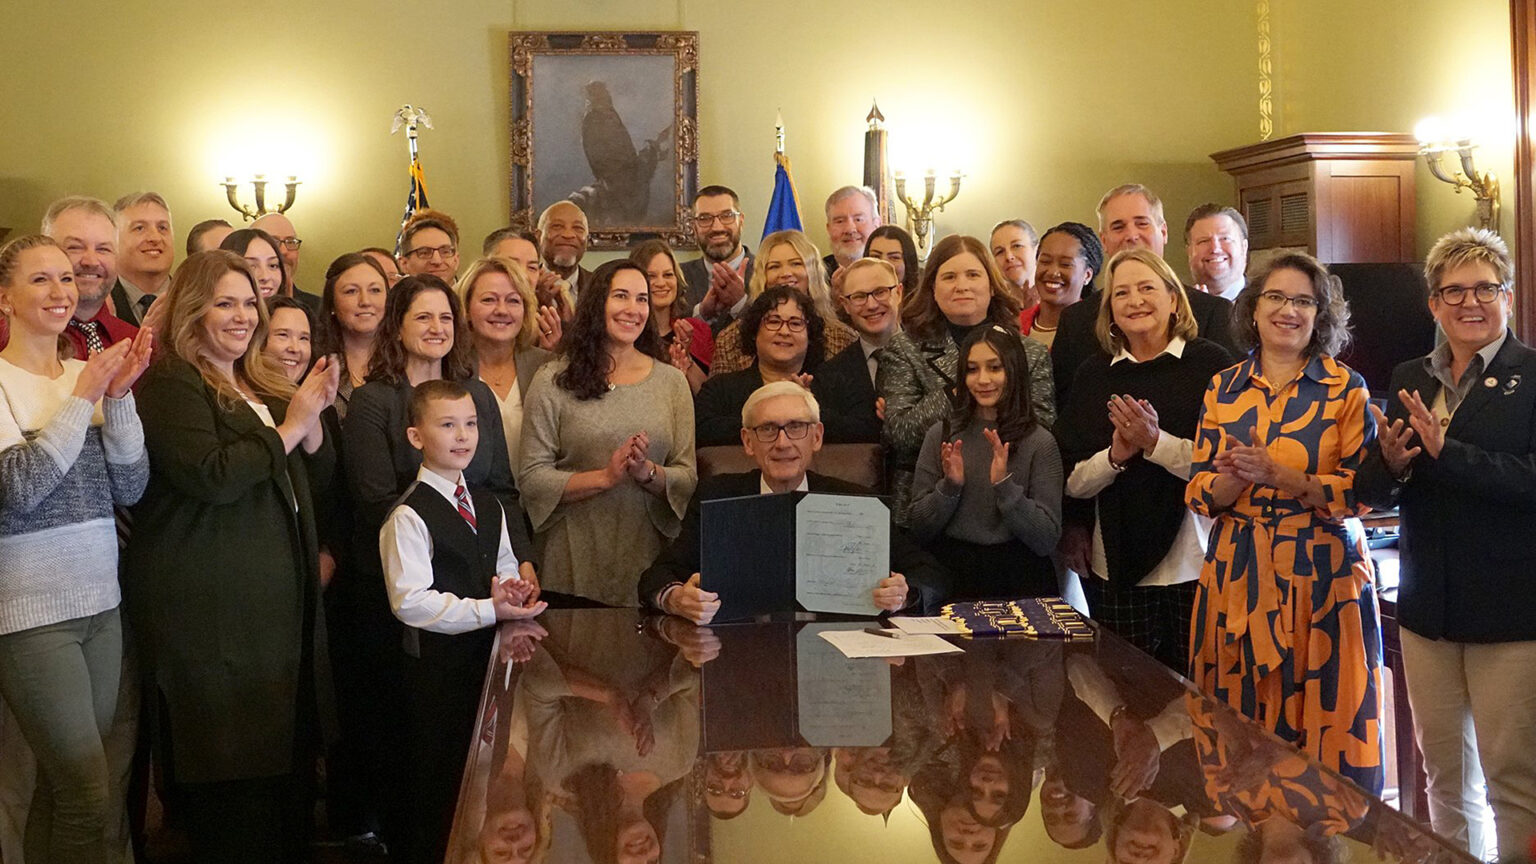 Tony Evers holds an open folder with a document on one side while seated at a table with a glass surface, reflecting people who are standing behind and around him and applauding, in a room with electric wall sconces, the U.S. and Wisconsin flags and a painting.